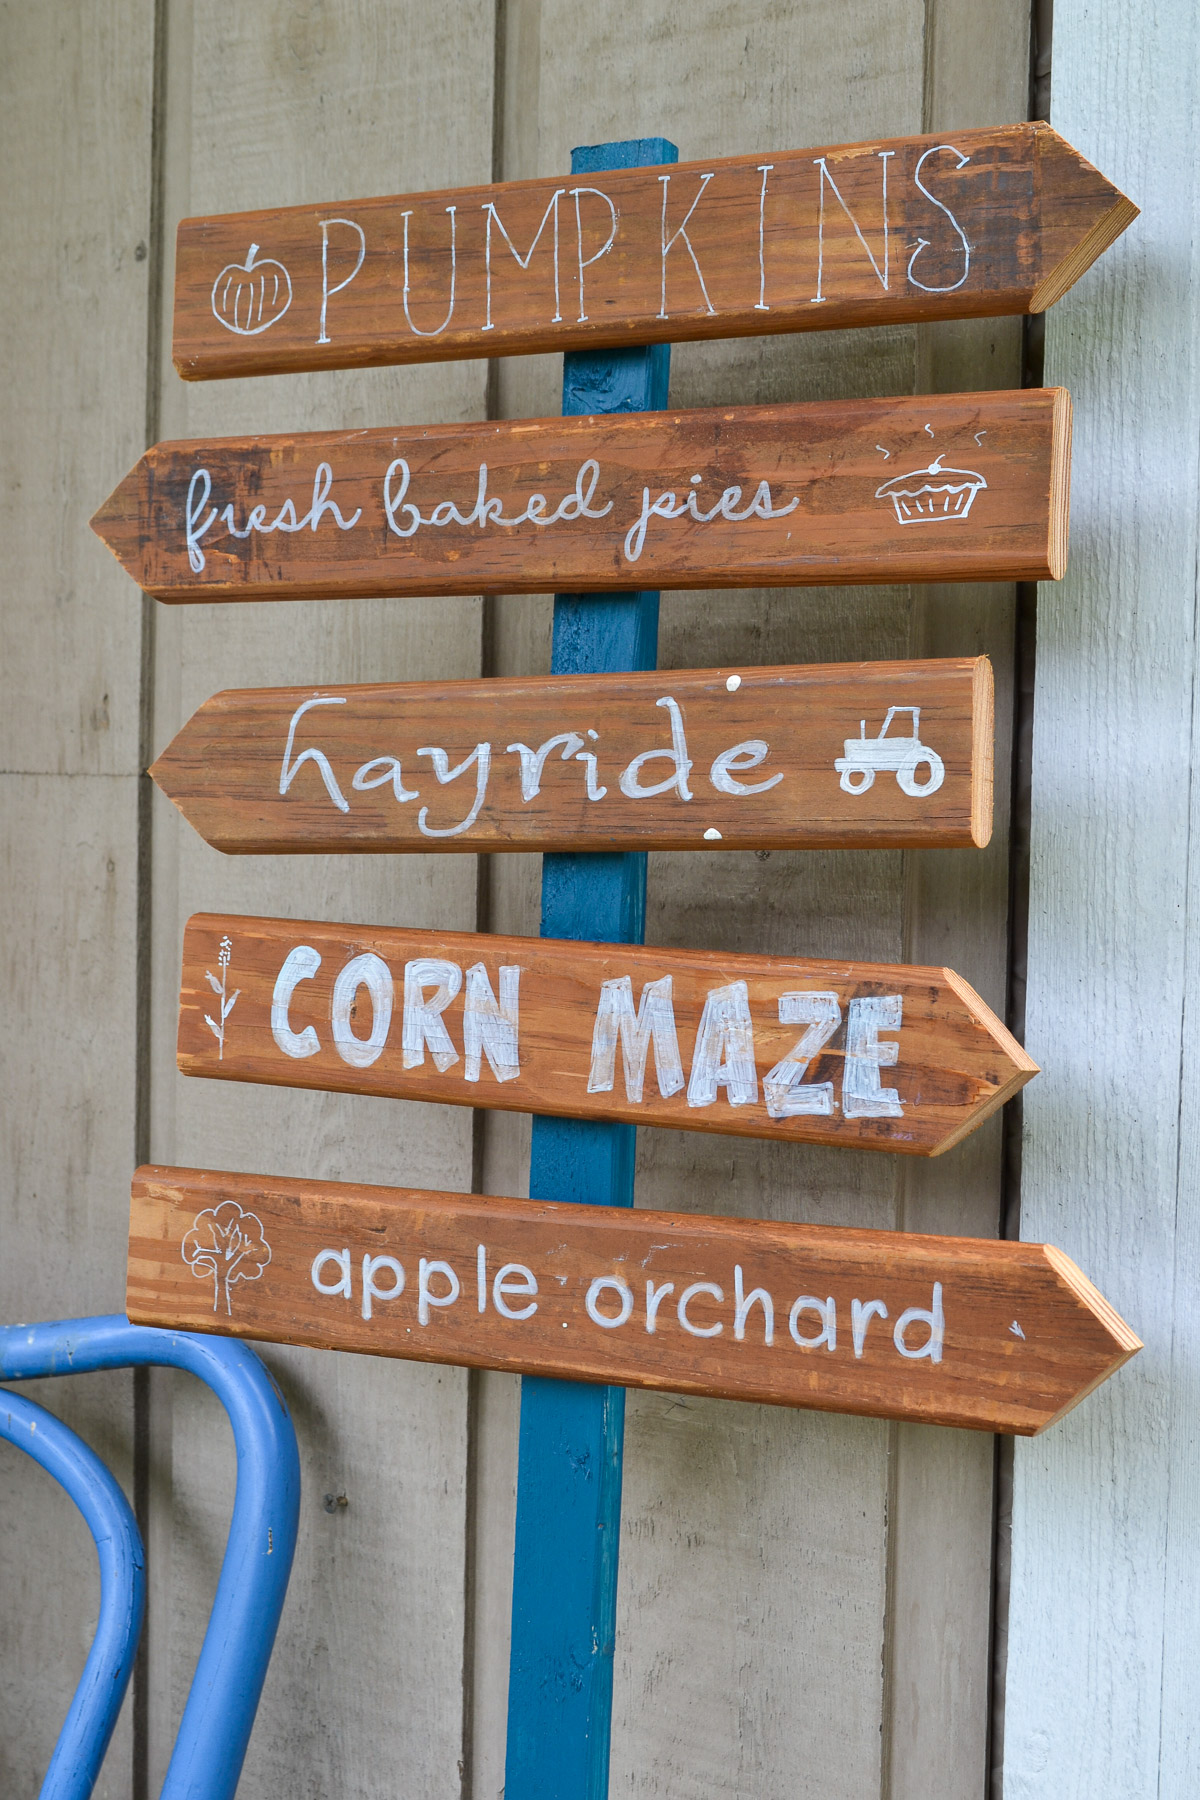 After learning the trick to write perfect letters on signs, this DIY fall wood sign would be so easy to make!